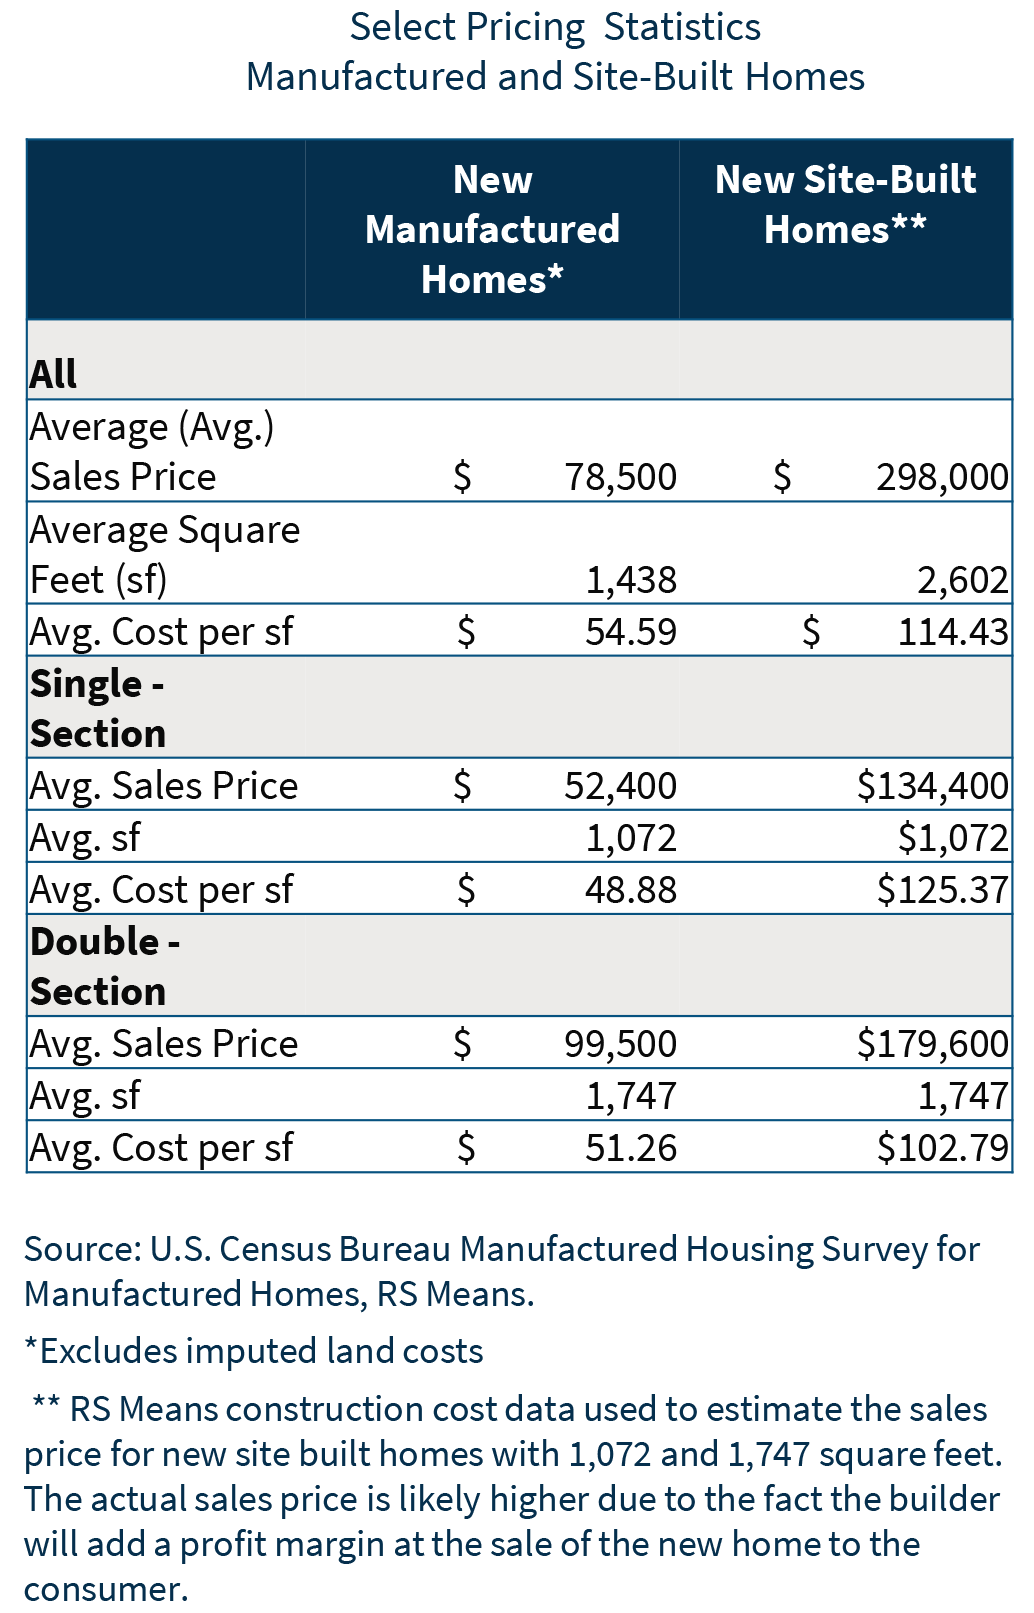 select pricing stats - manufactured and site-built homes